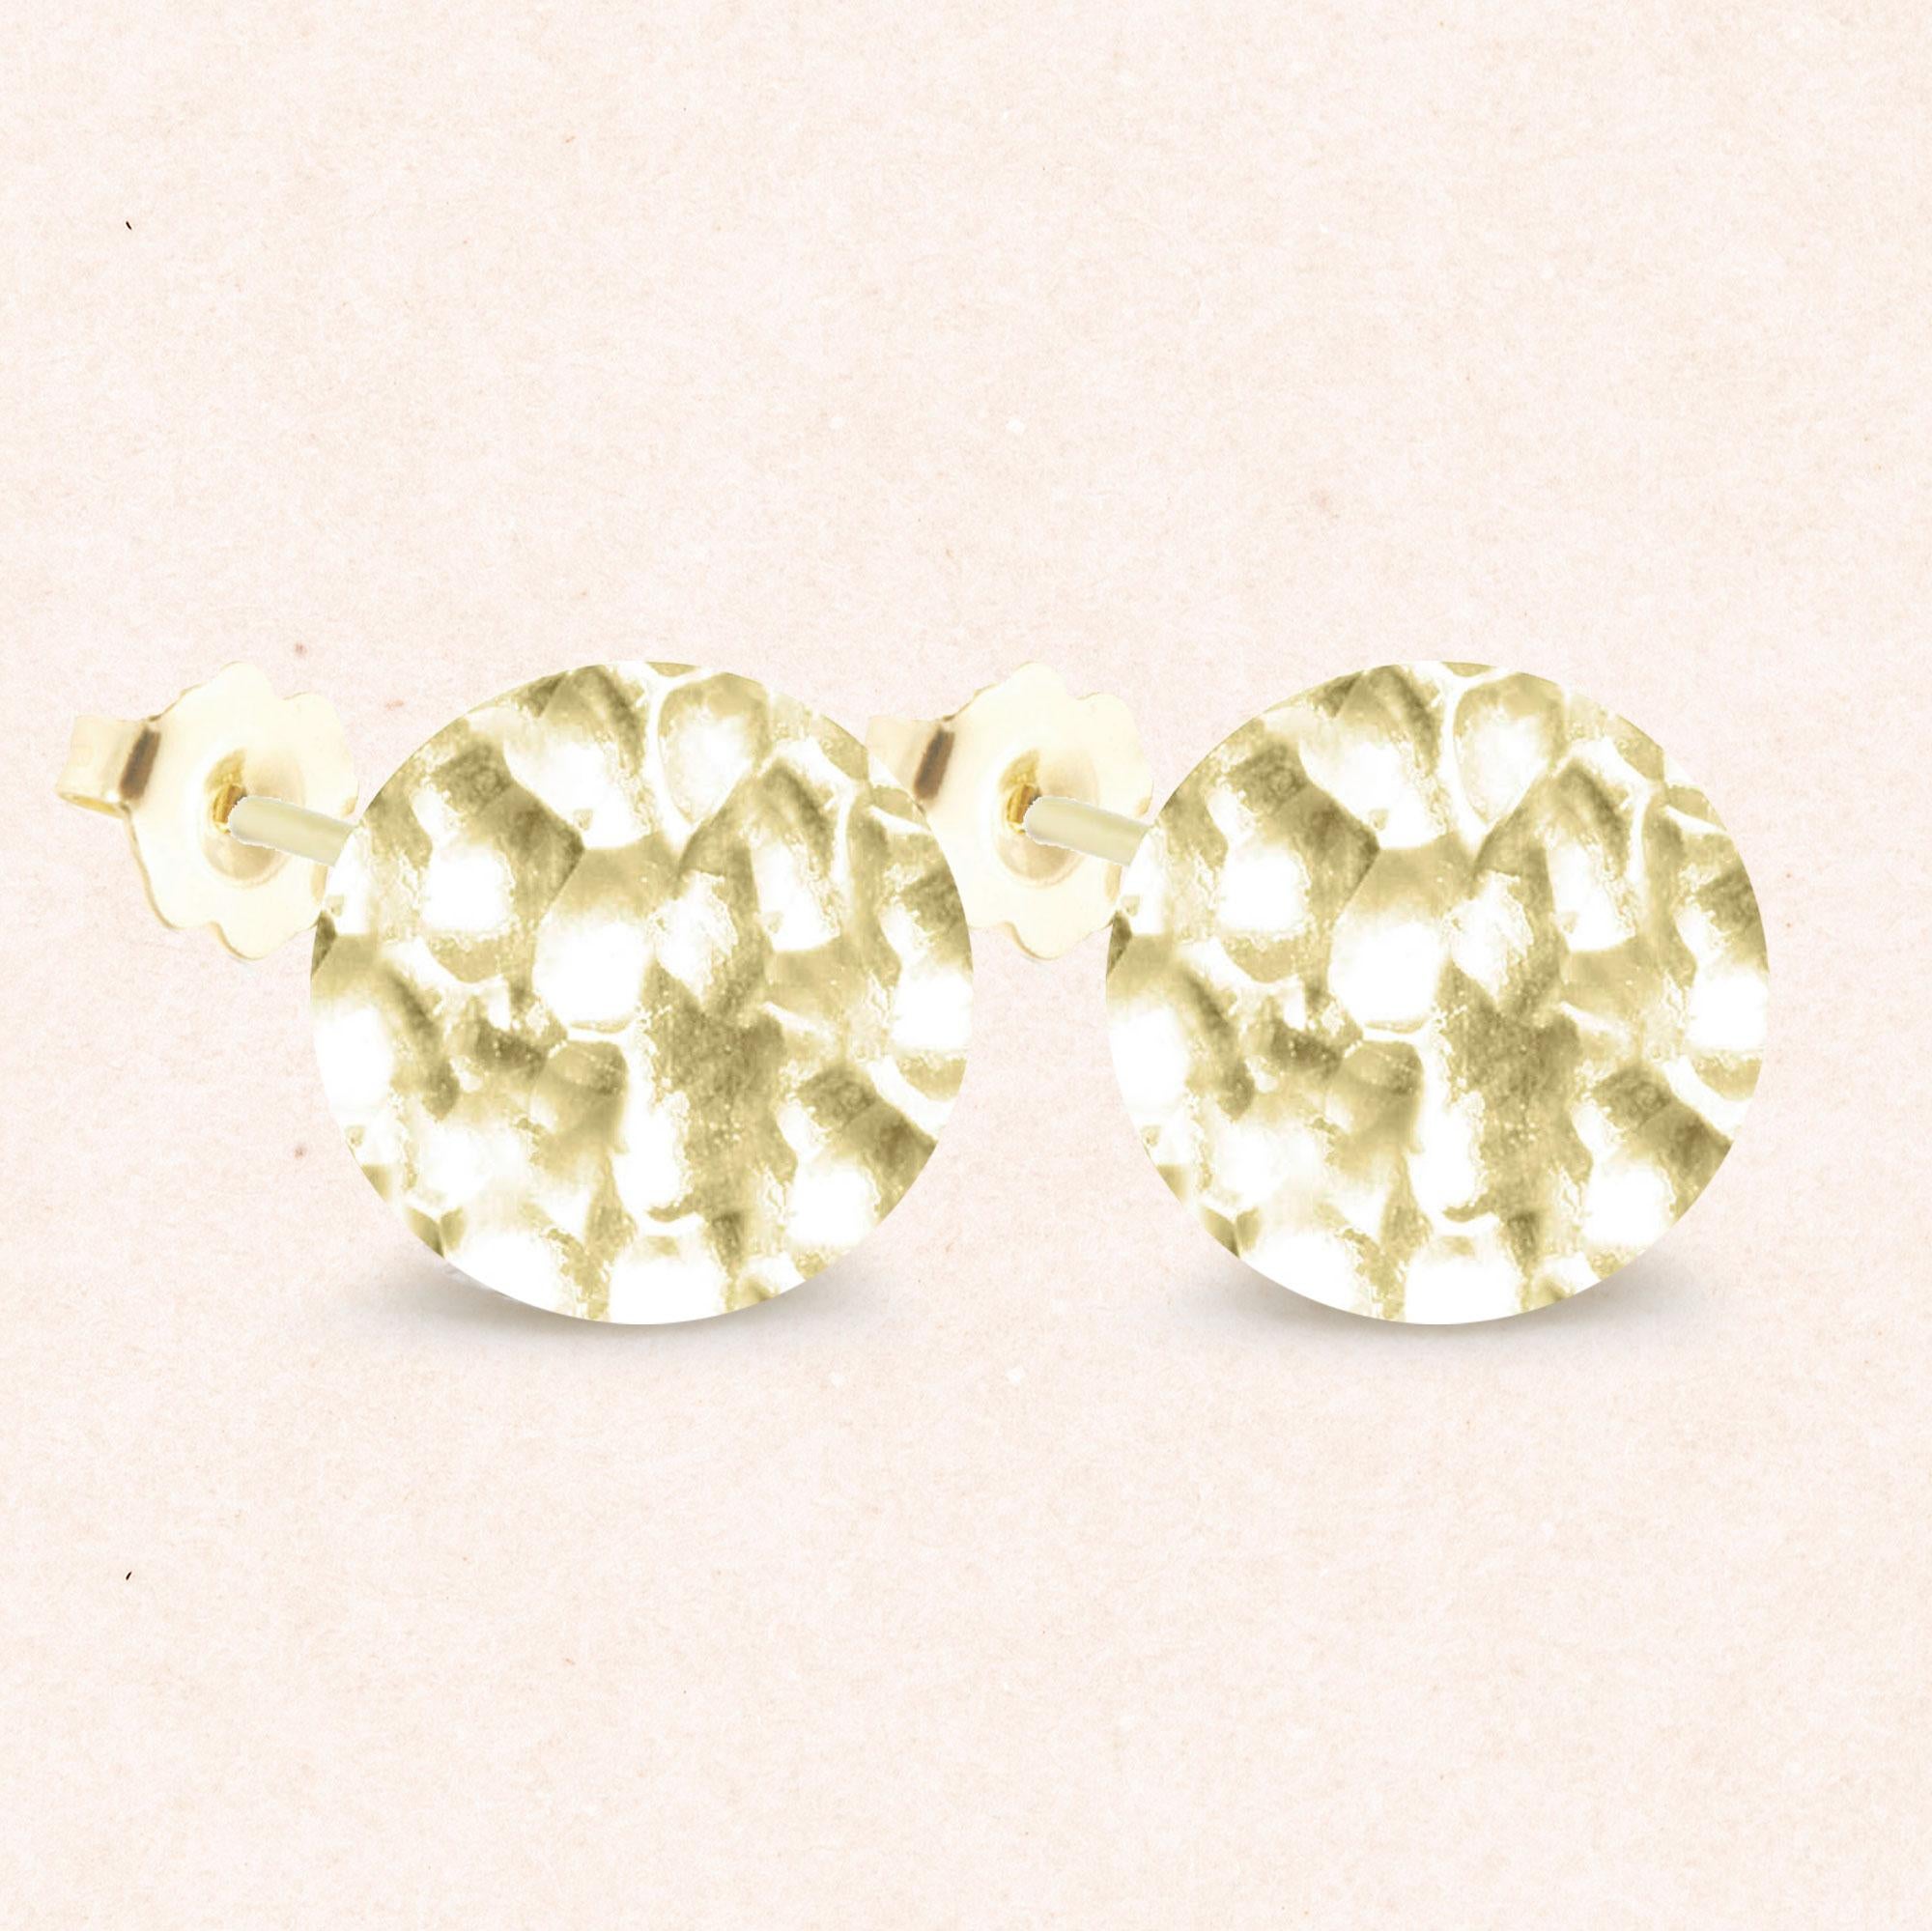 Nina Nguyen Design's patent-pending earrings have an element on the back of the stud or charm to allow these pieces to transformed into multi-use, stackable and convertible styling. It can be turned into a pendant and worn on a necklace, or used as